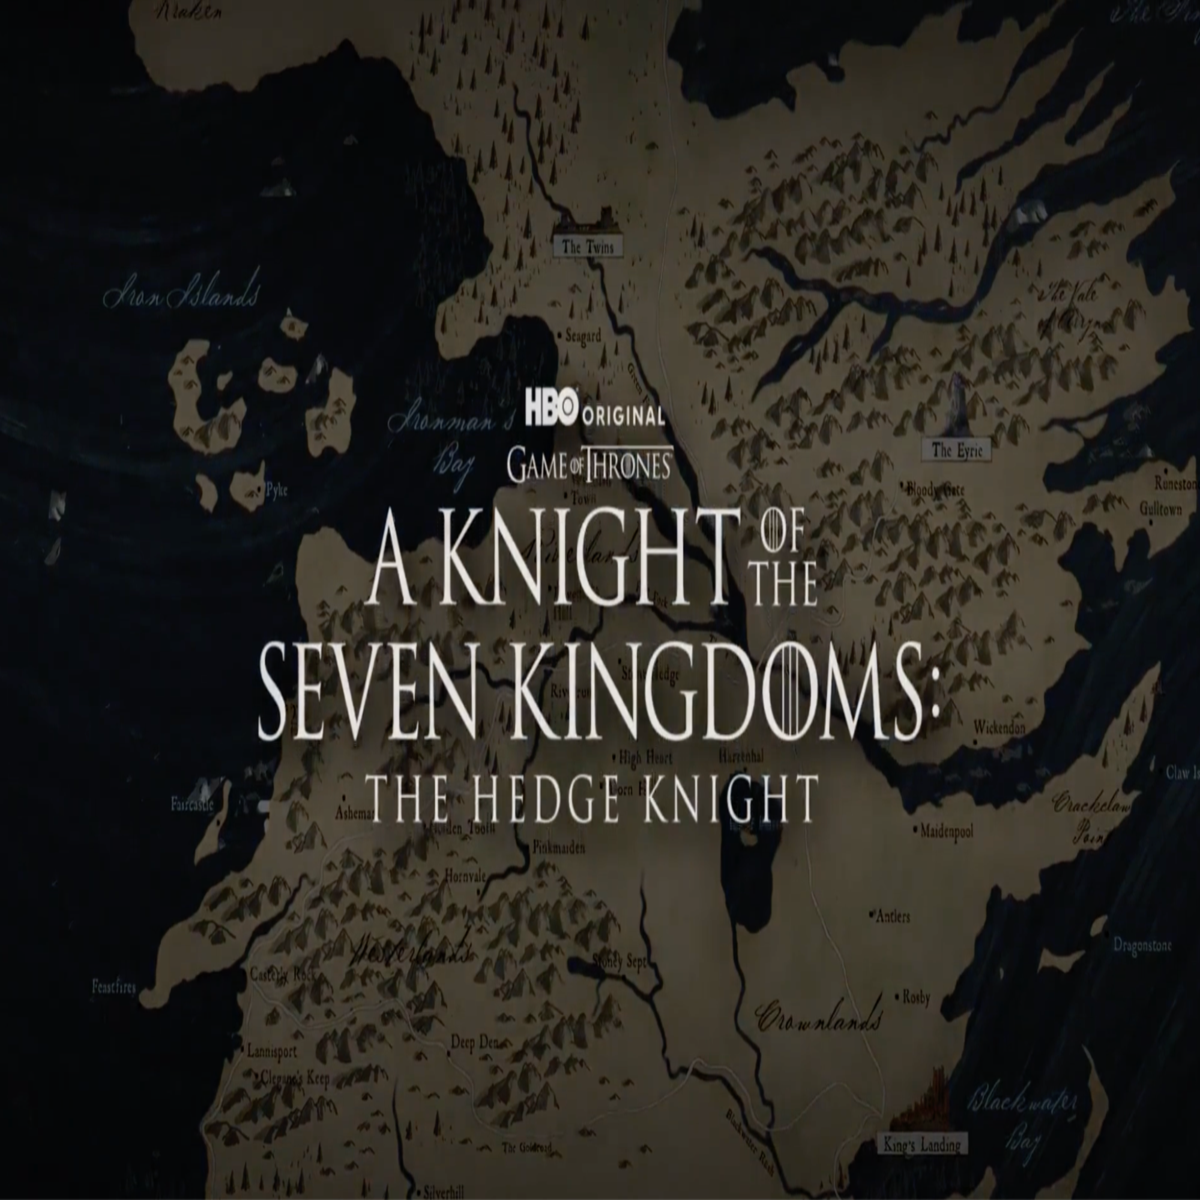 Game of Thrones' Prequel About Aegon's Conquest Eyed at HBO